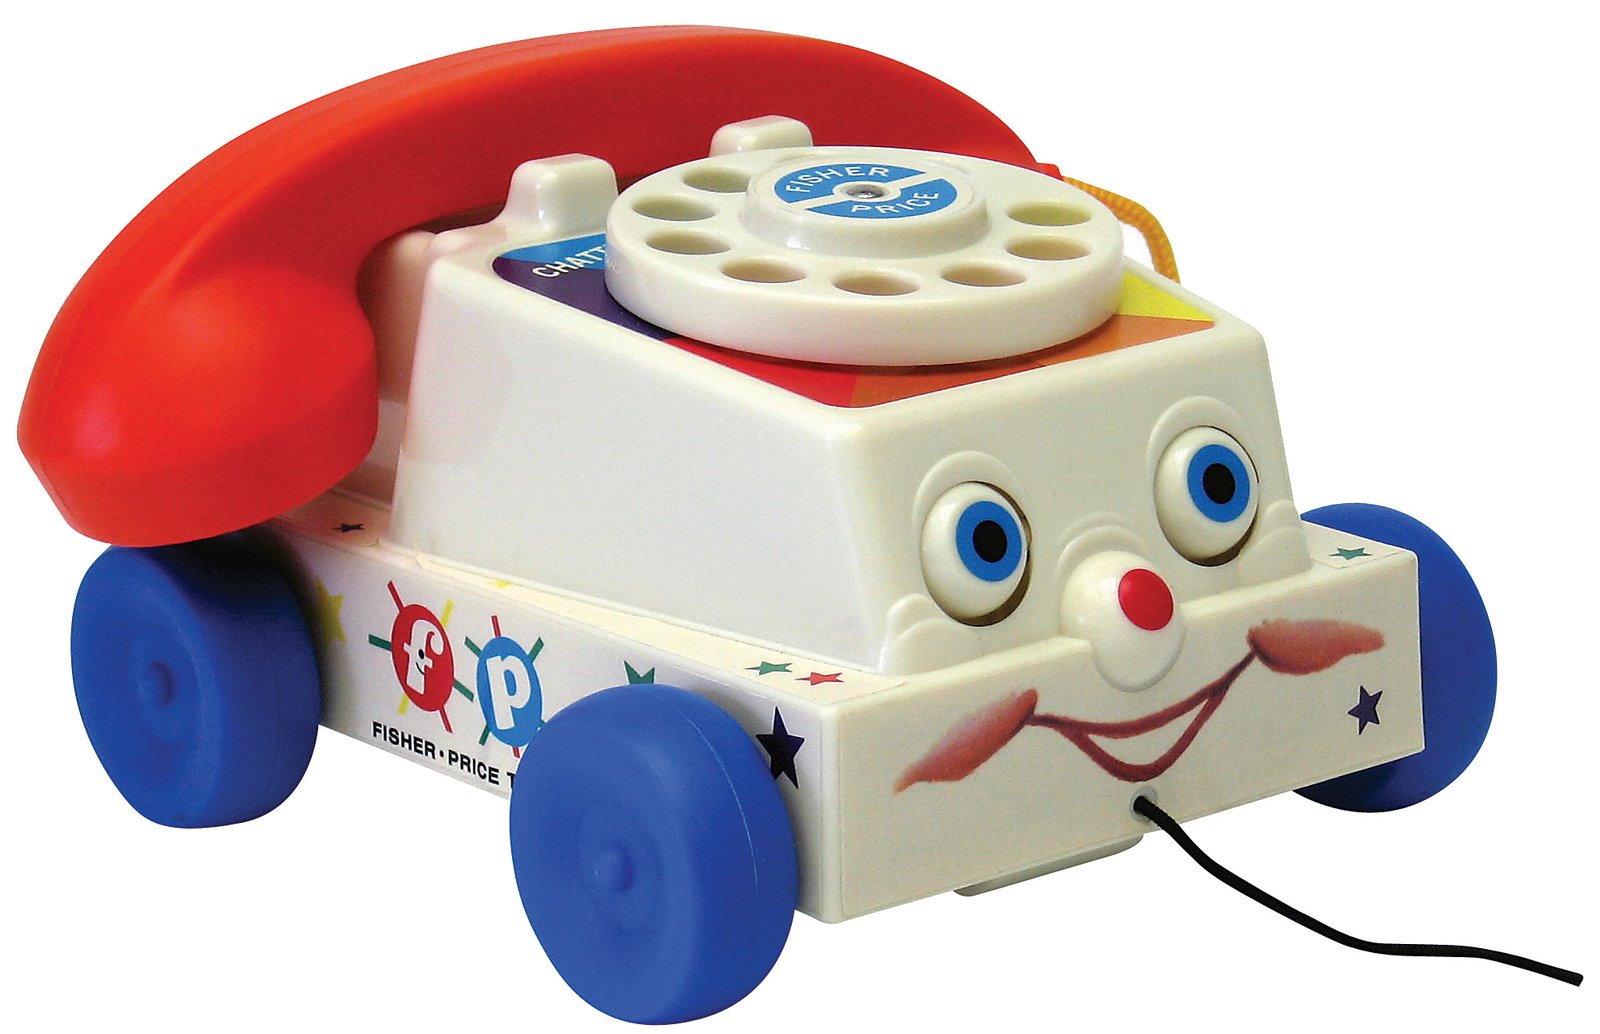 Kids Discover Rotary Phones, Everyone Else Feels Really Old